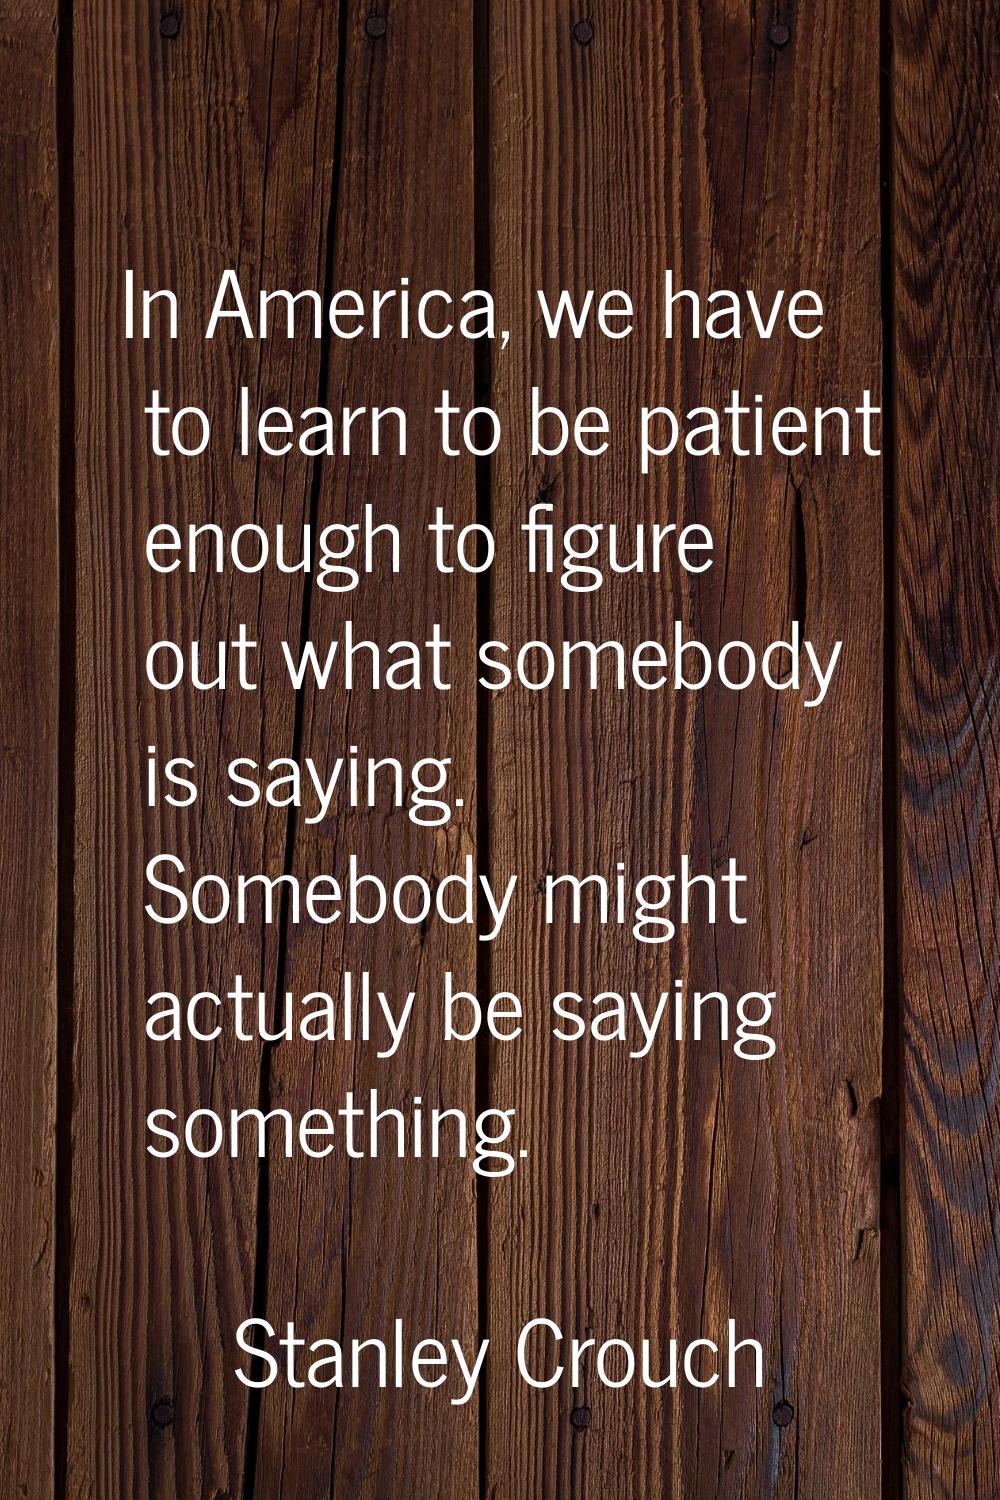 In America, we have to learn to be patient enough to figure out what somebody is saying. Somebody m